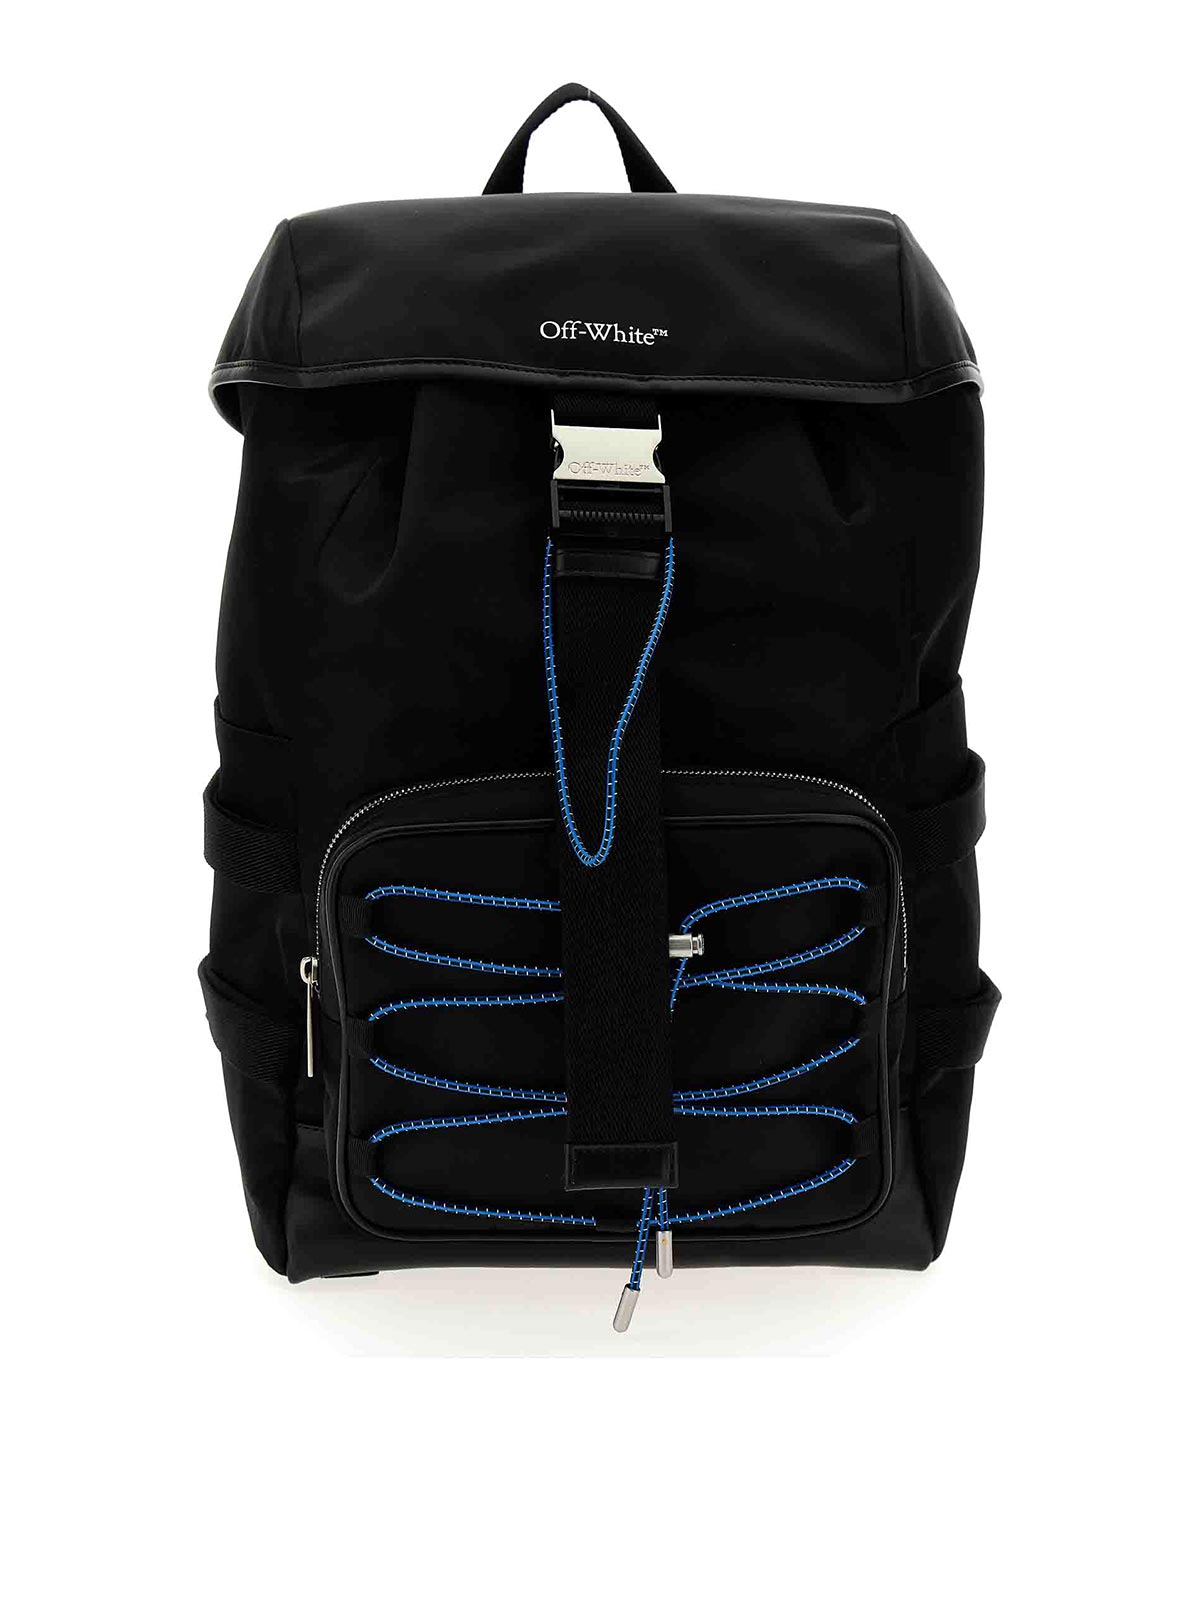 OFF-WHITE COURRIER BACKPACK